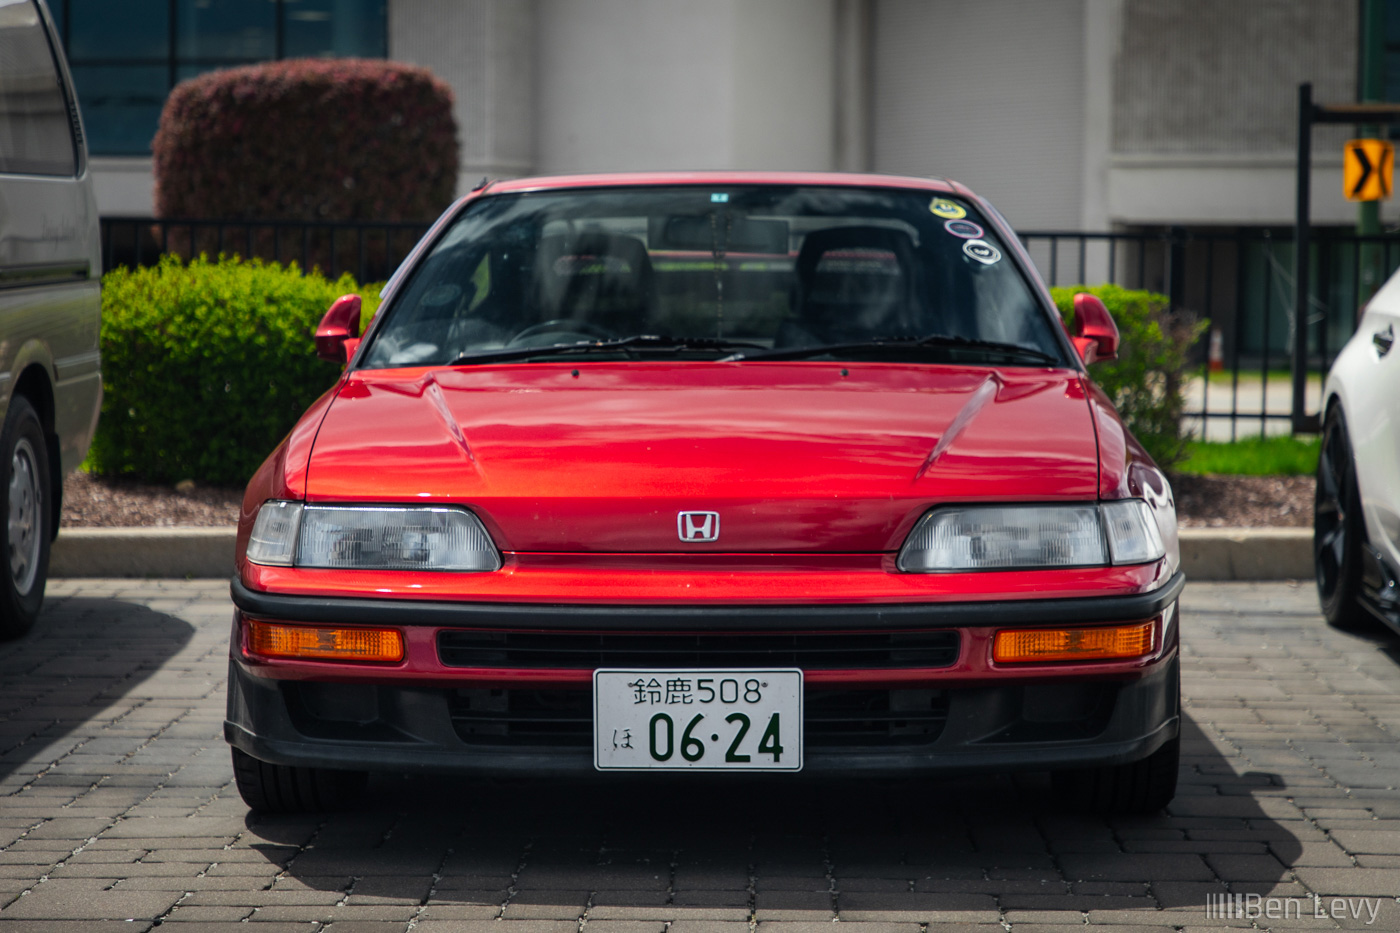 Front of Red JDM Honda CR-X at a Chicago Car Meet